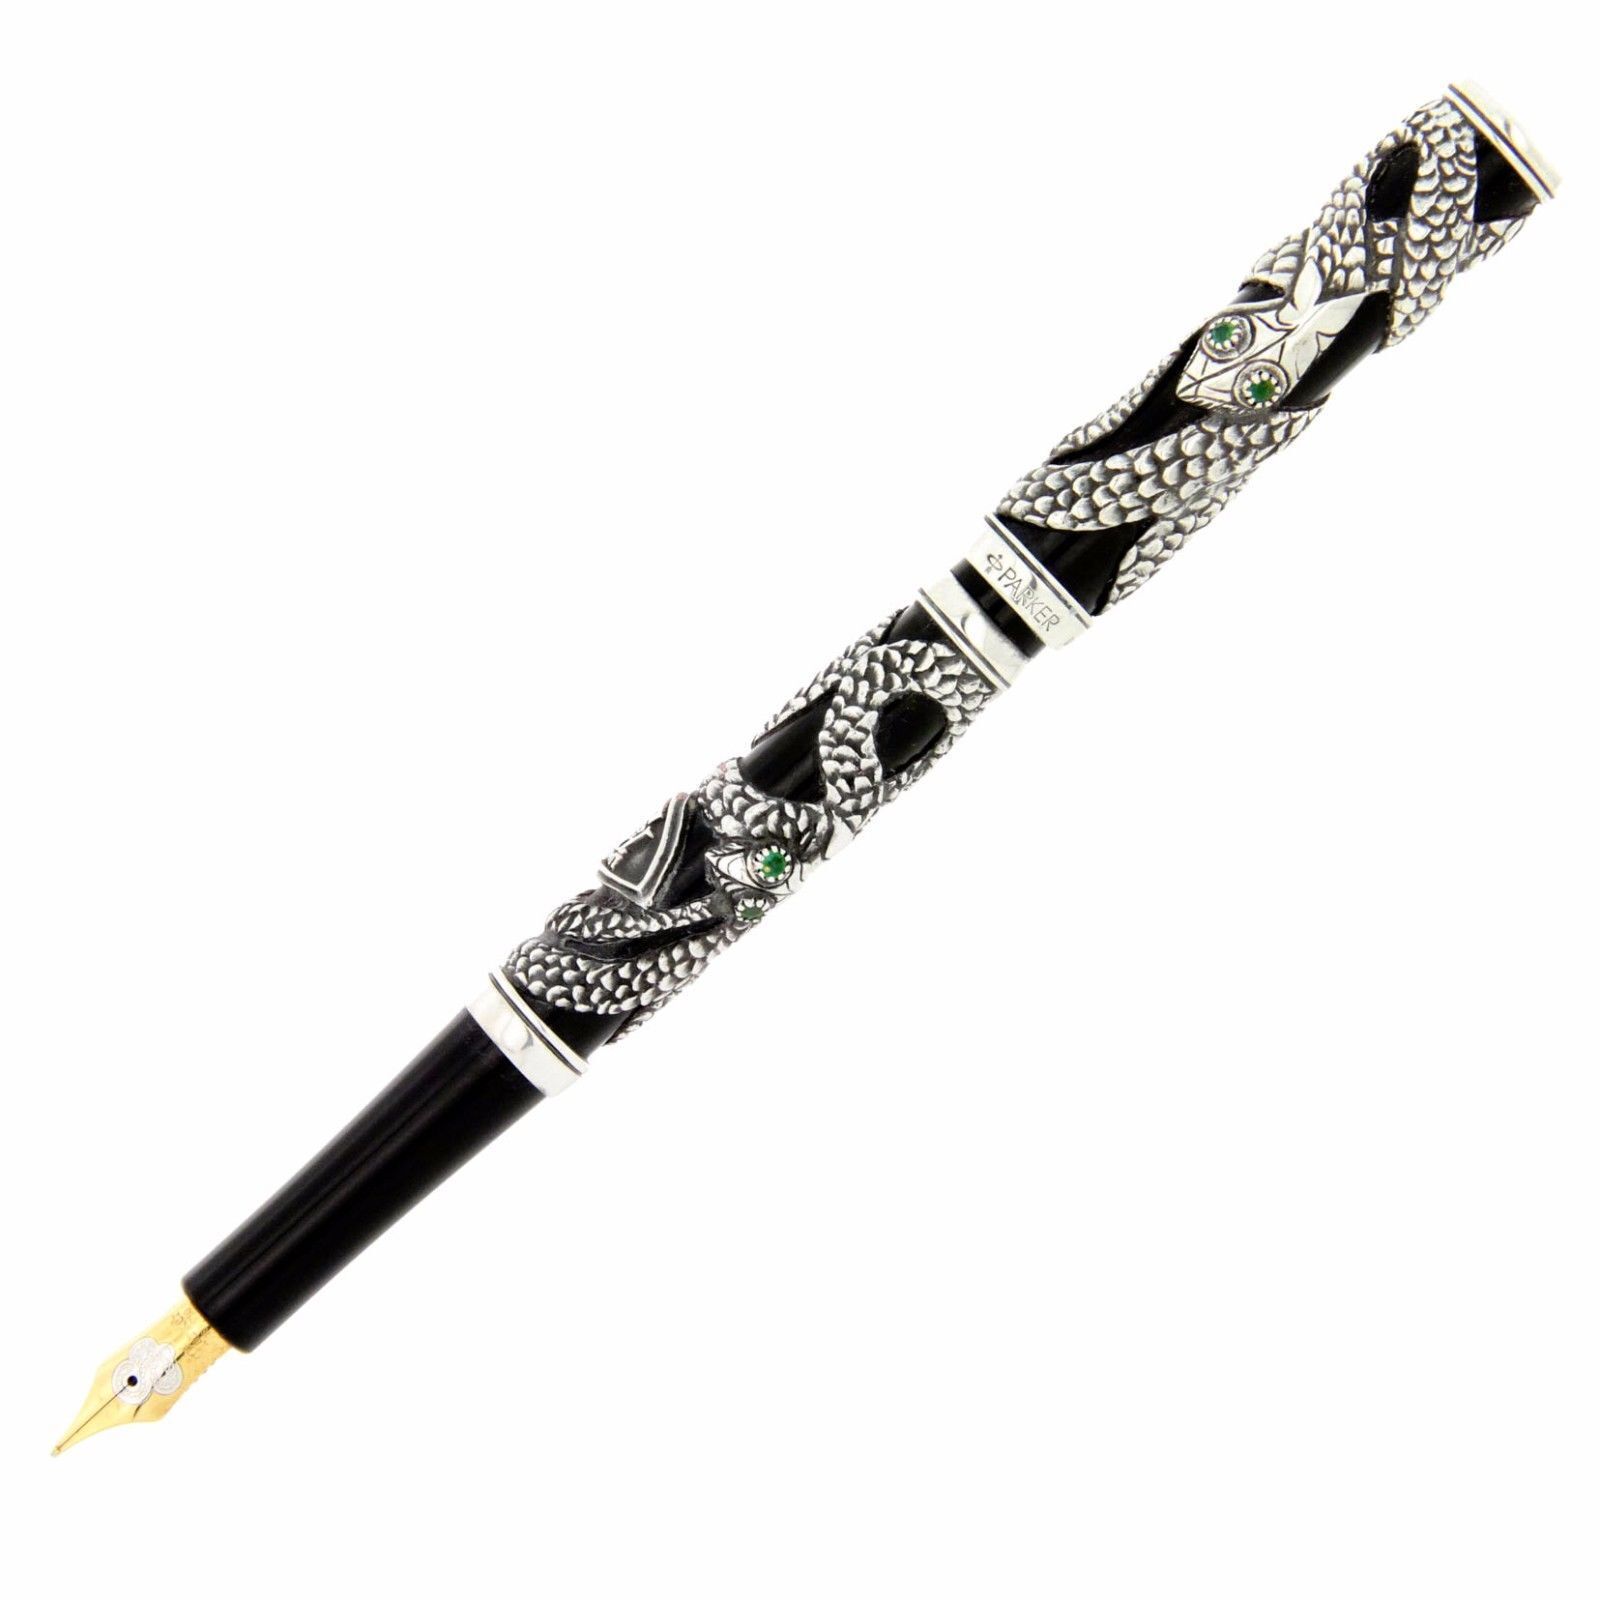 Parker Duofold  Fountain Pen Limited Edition Sterling Silver Snake  New In Box